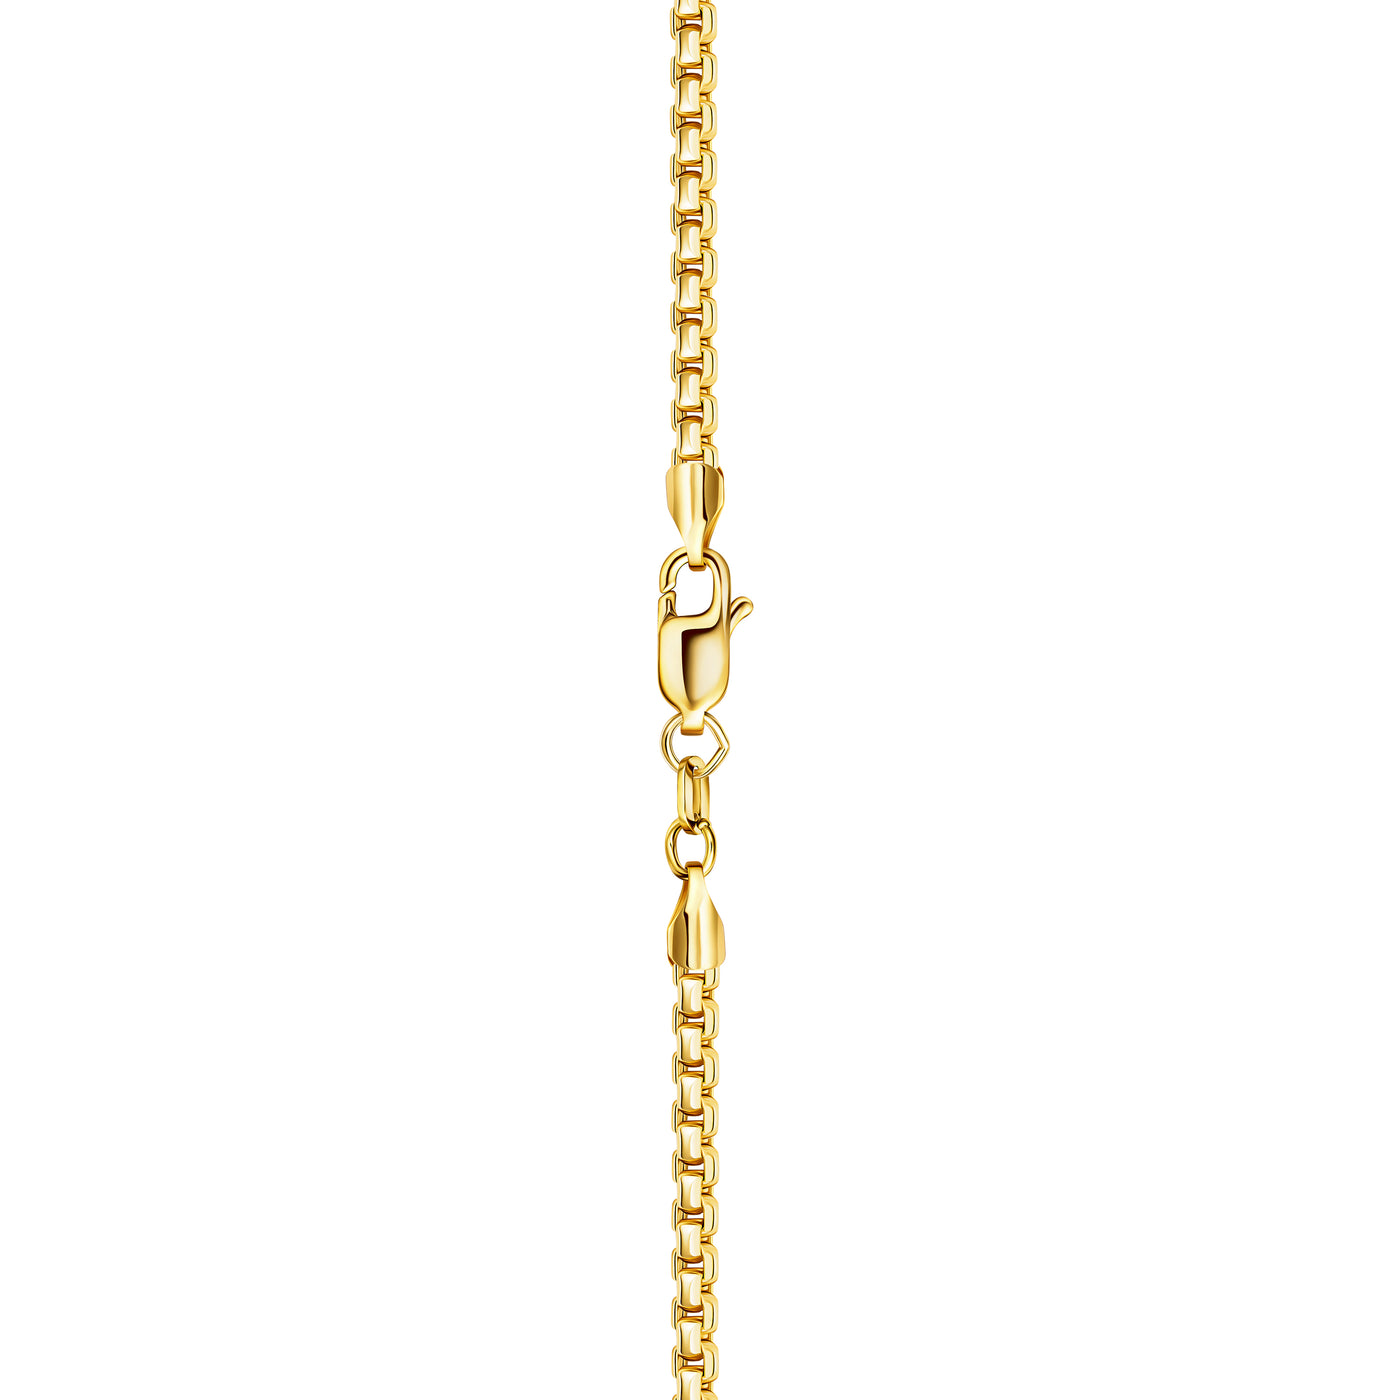 MENS 14K Gold Round Box Chain Necklace